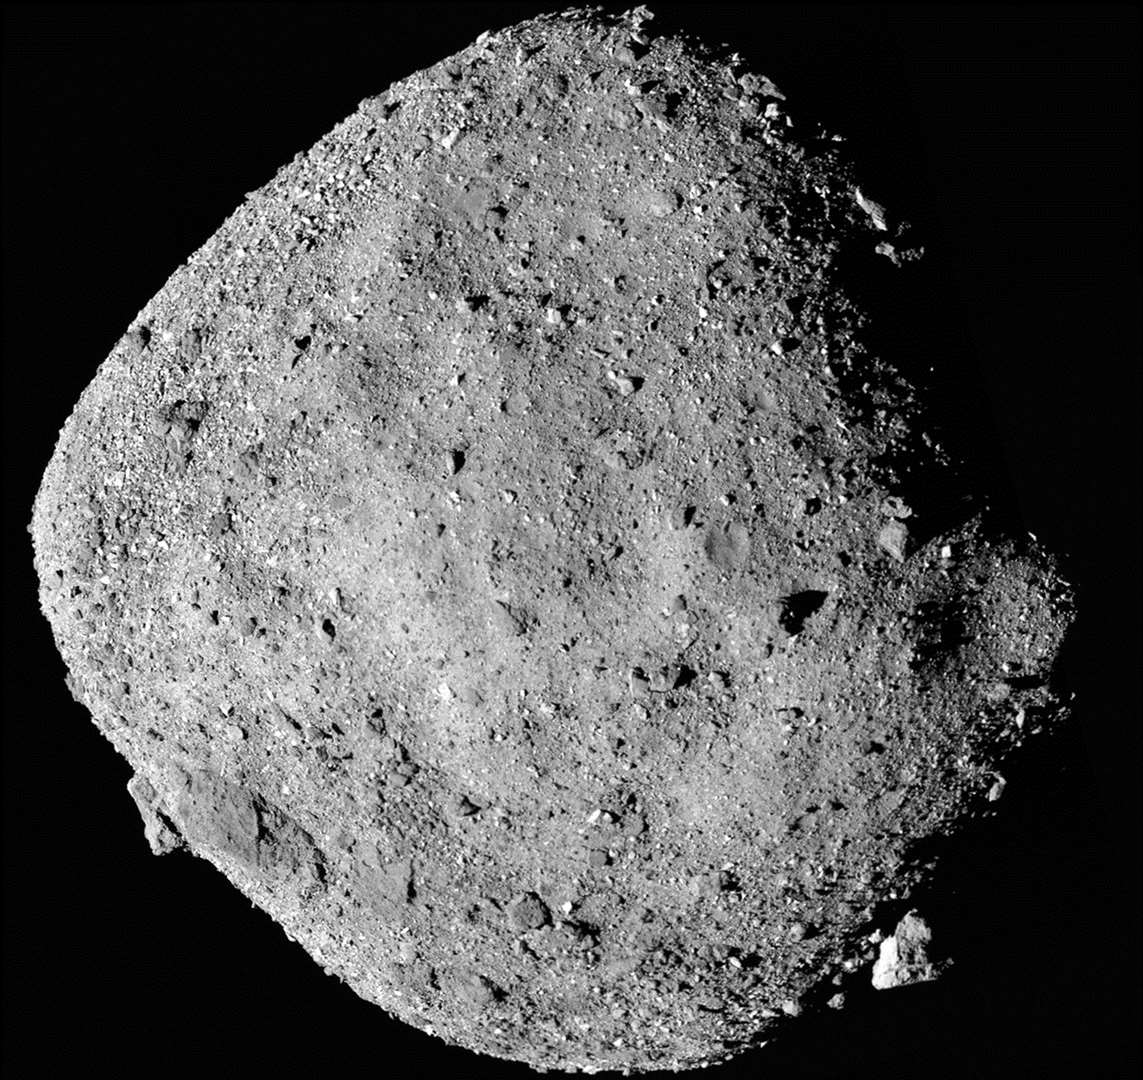 The asteroid Bennu could contain the ‘building blocks of life on Earth’ (Nasa/PA)